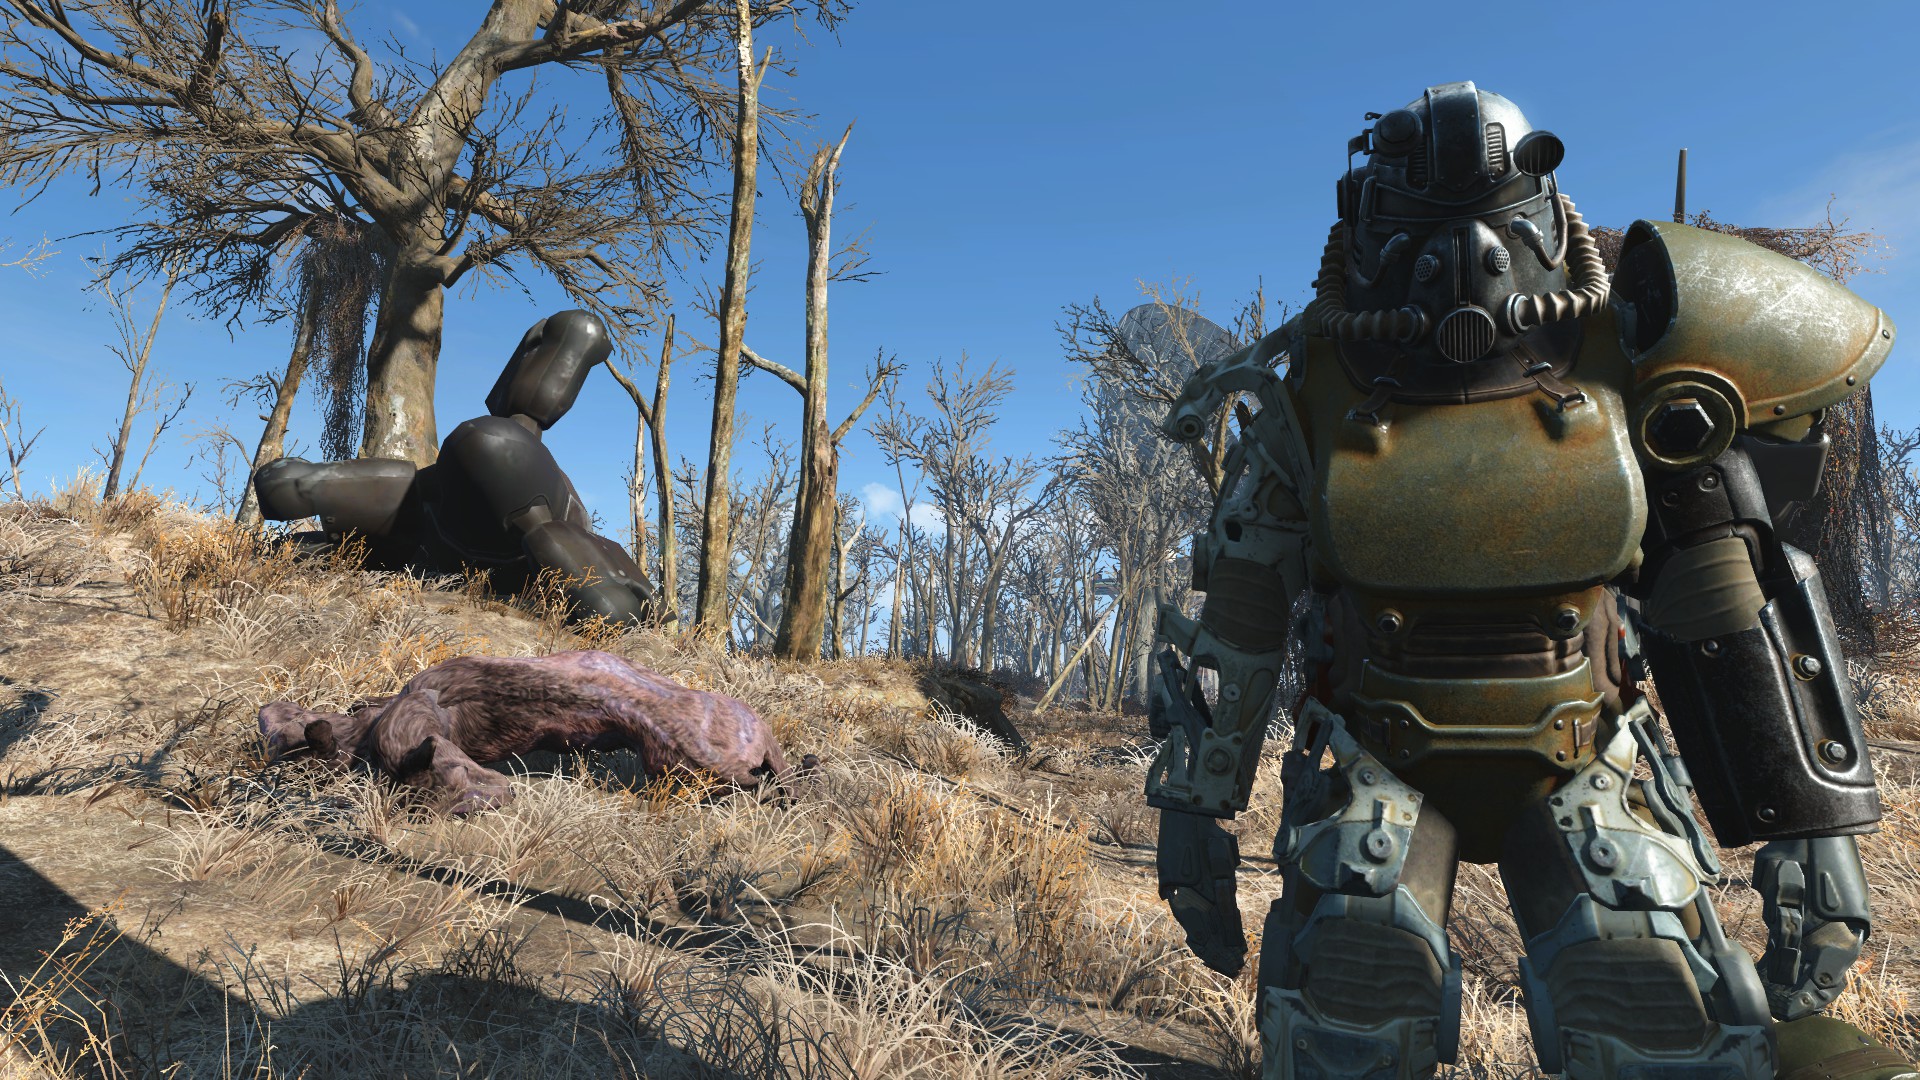 The Newest Fallout 4 Patch Allows Hacking Robots At Any Distance - Gameranx